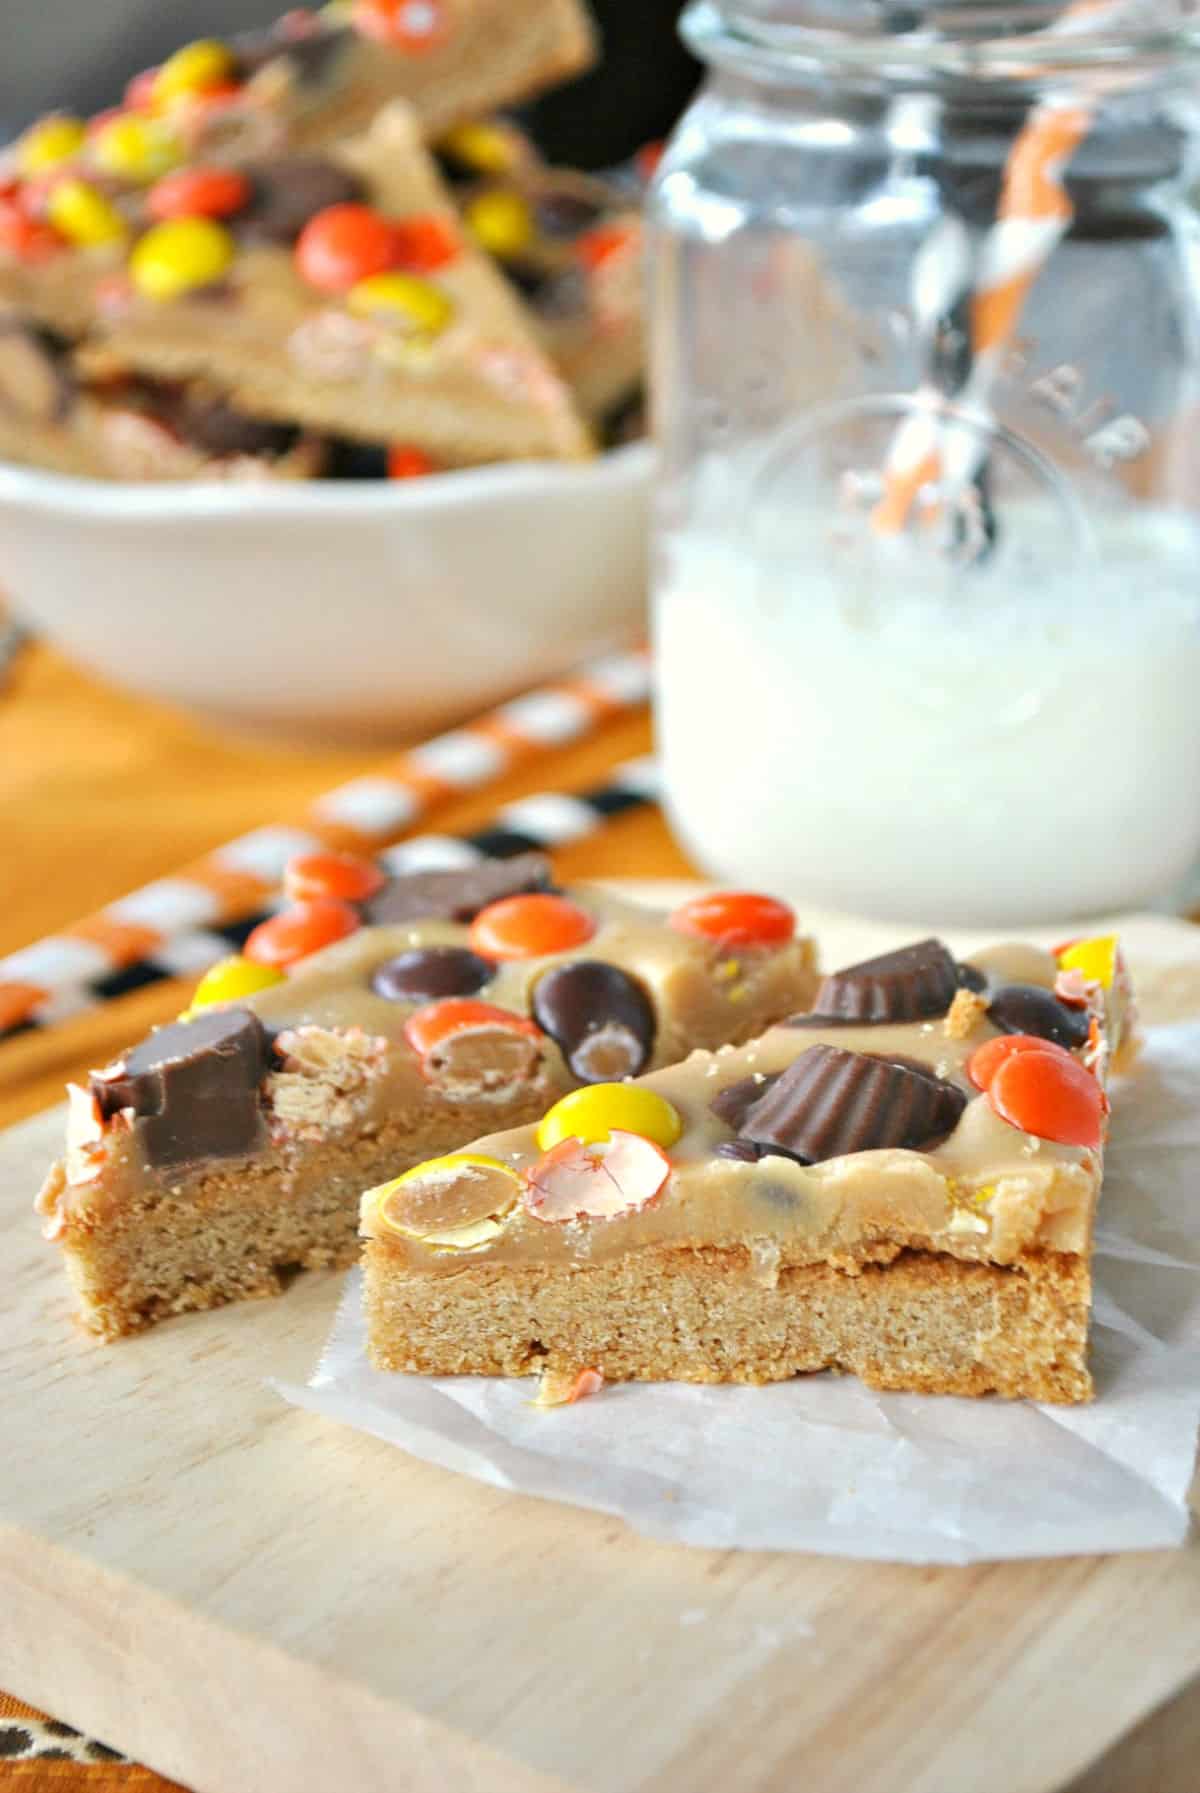 Peanut butter cookie bar cut into a triangle shape and topped with reeses pieces.